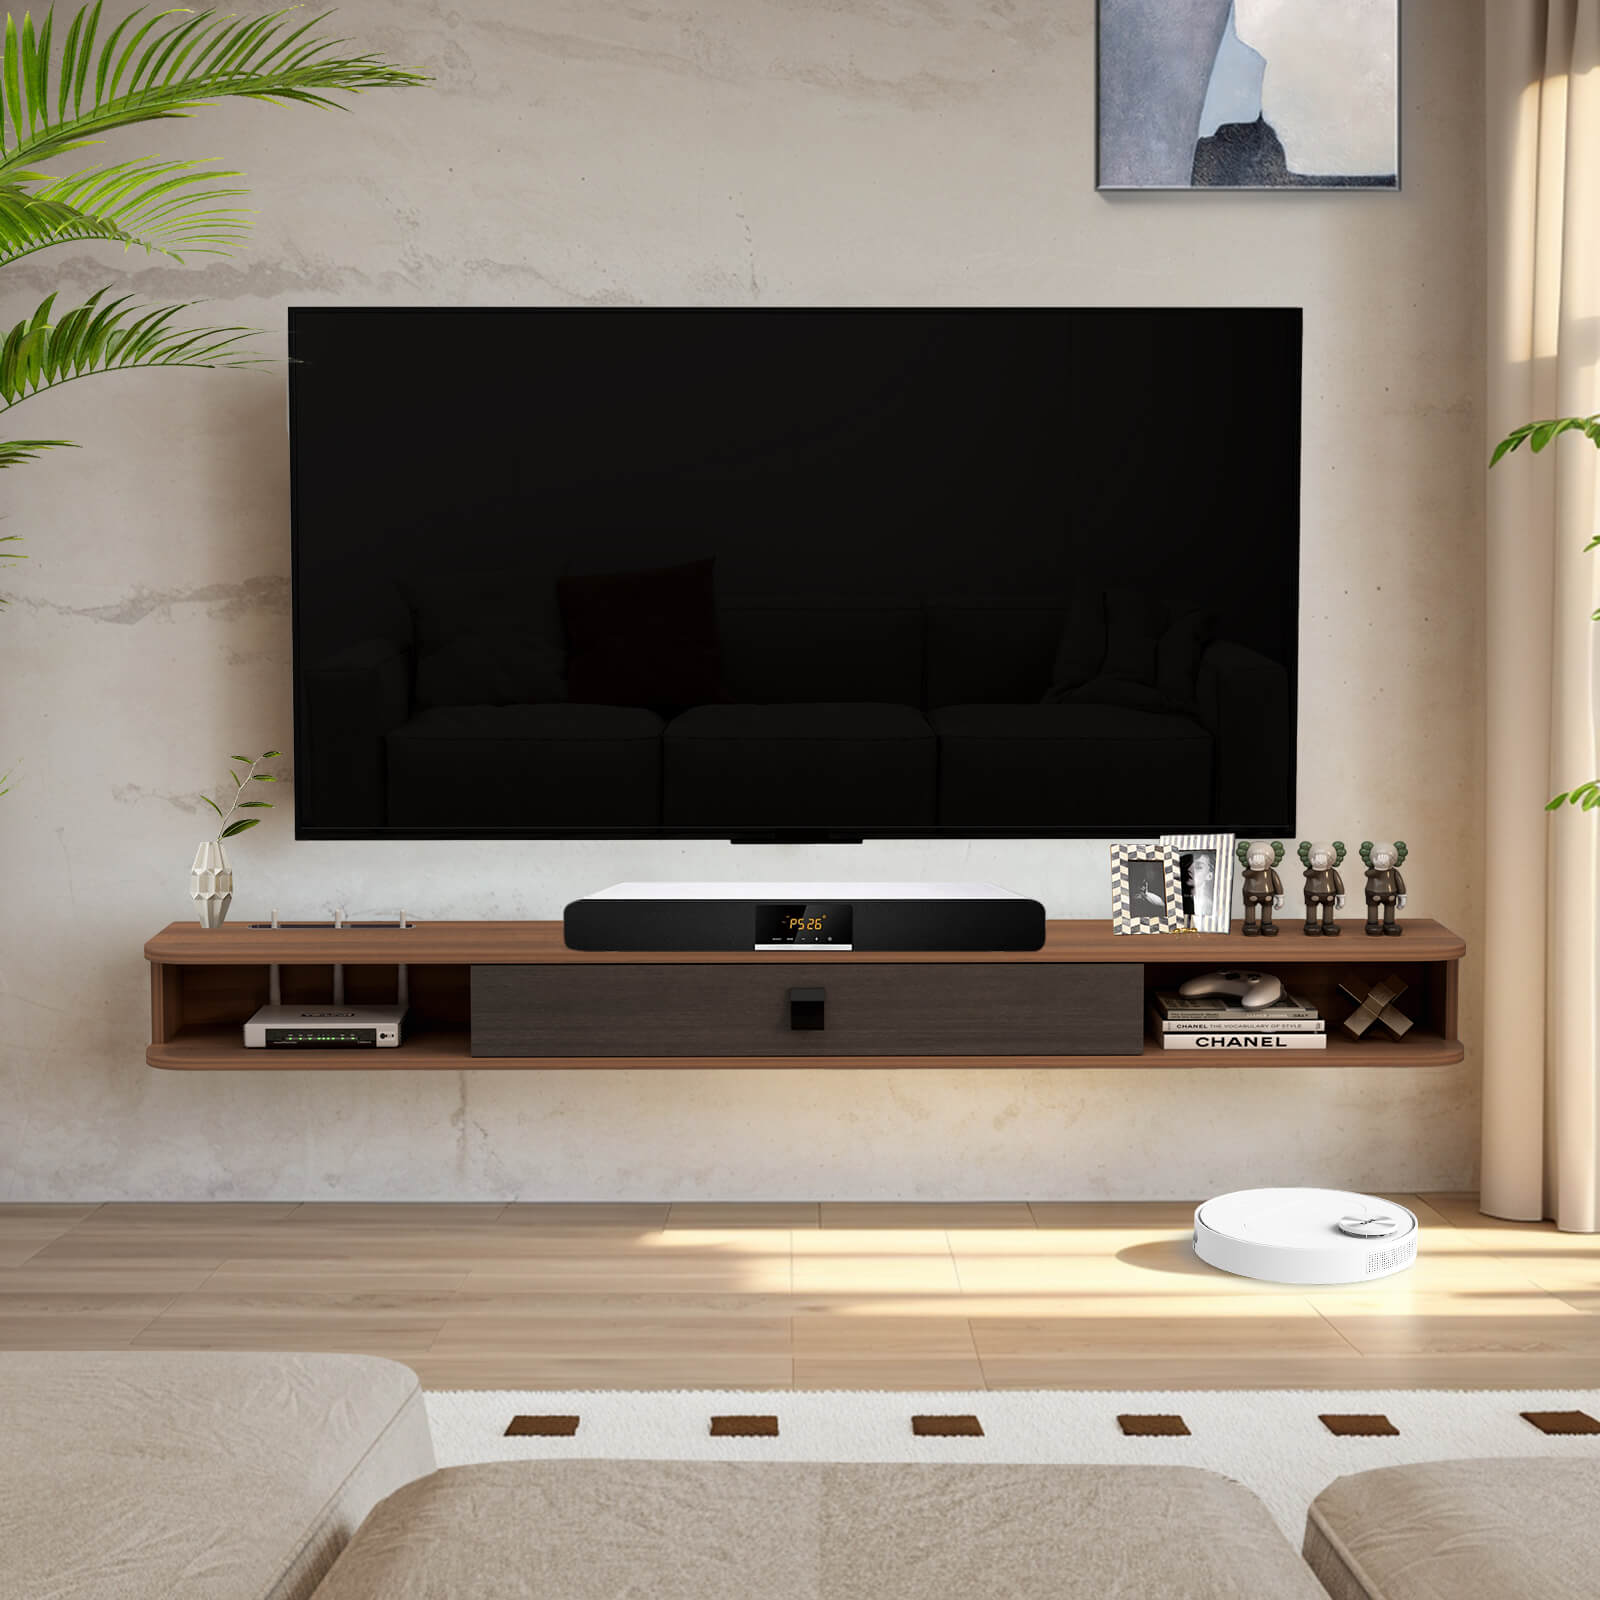 78.74" Walnut Plywood Slim Floating TV Stand for 85" TV